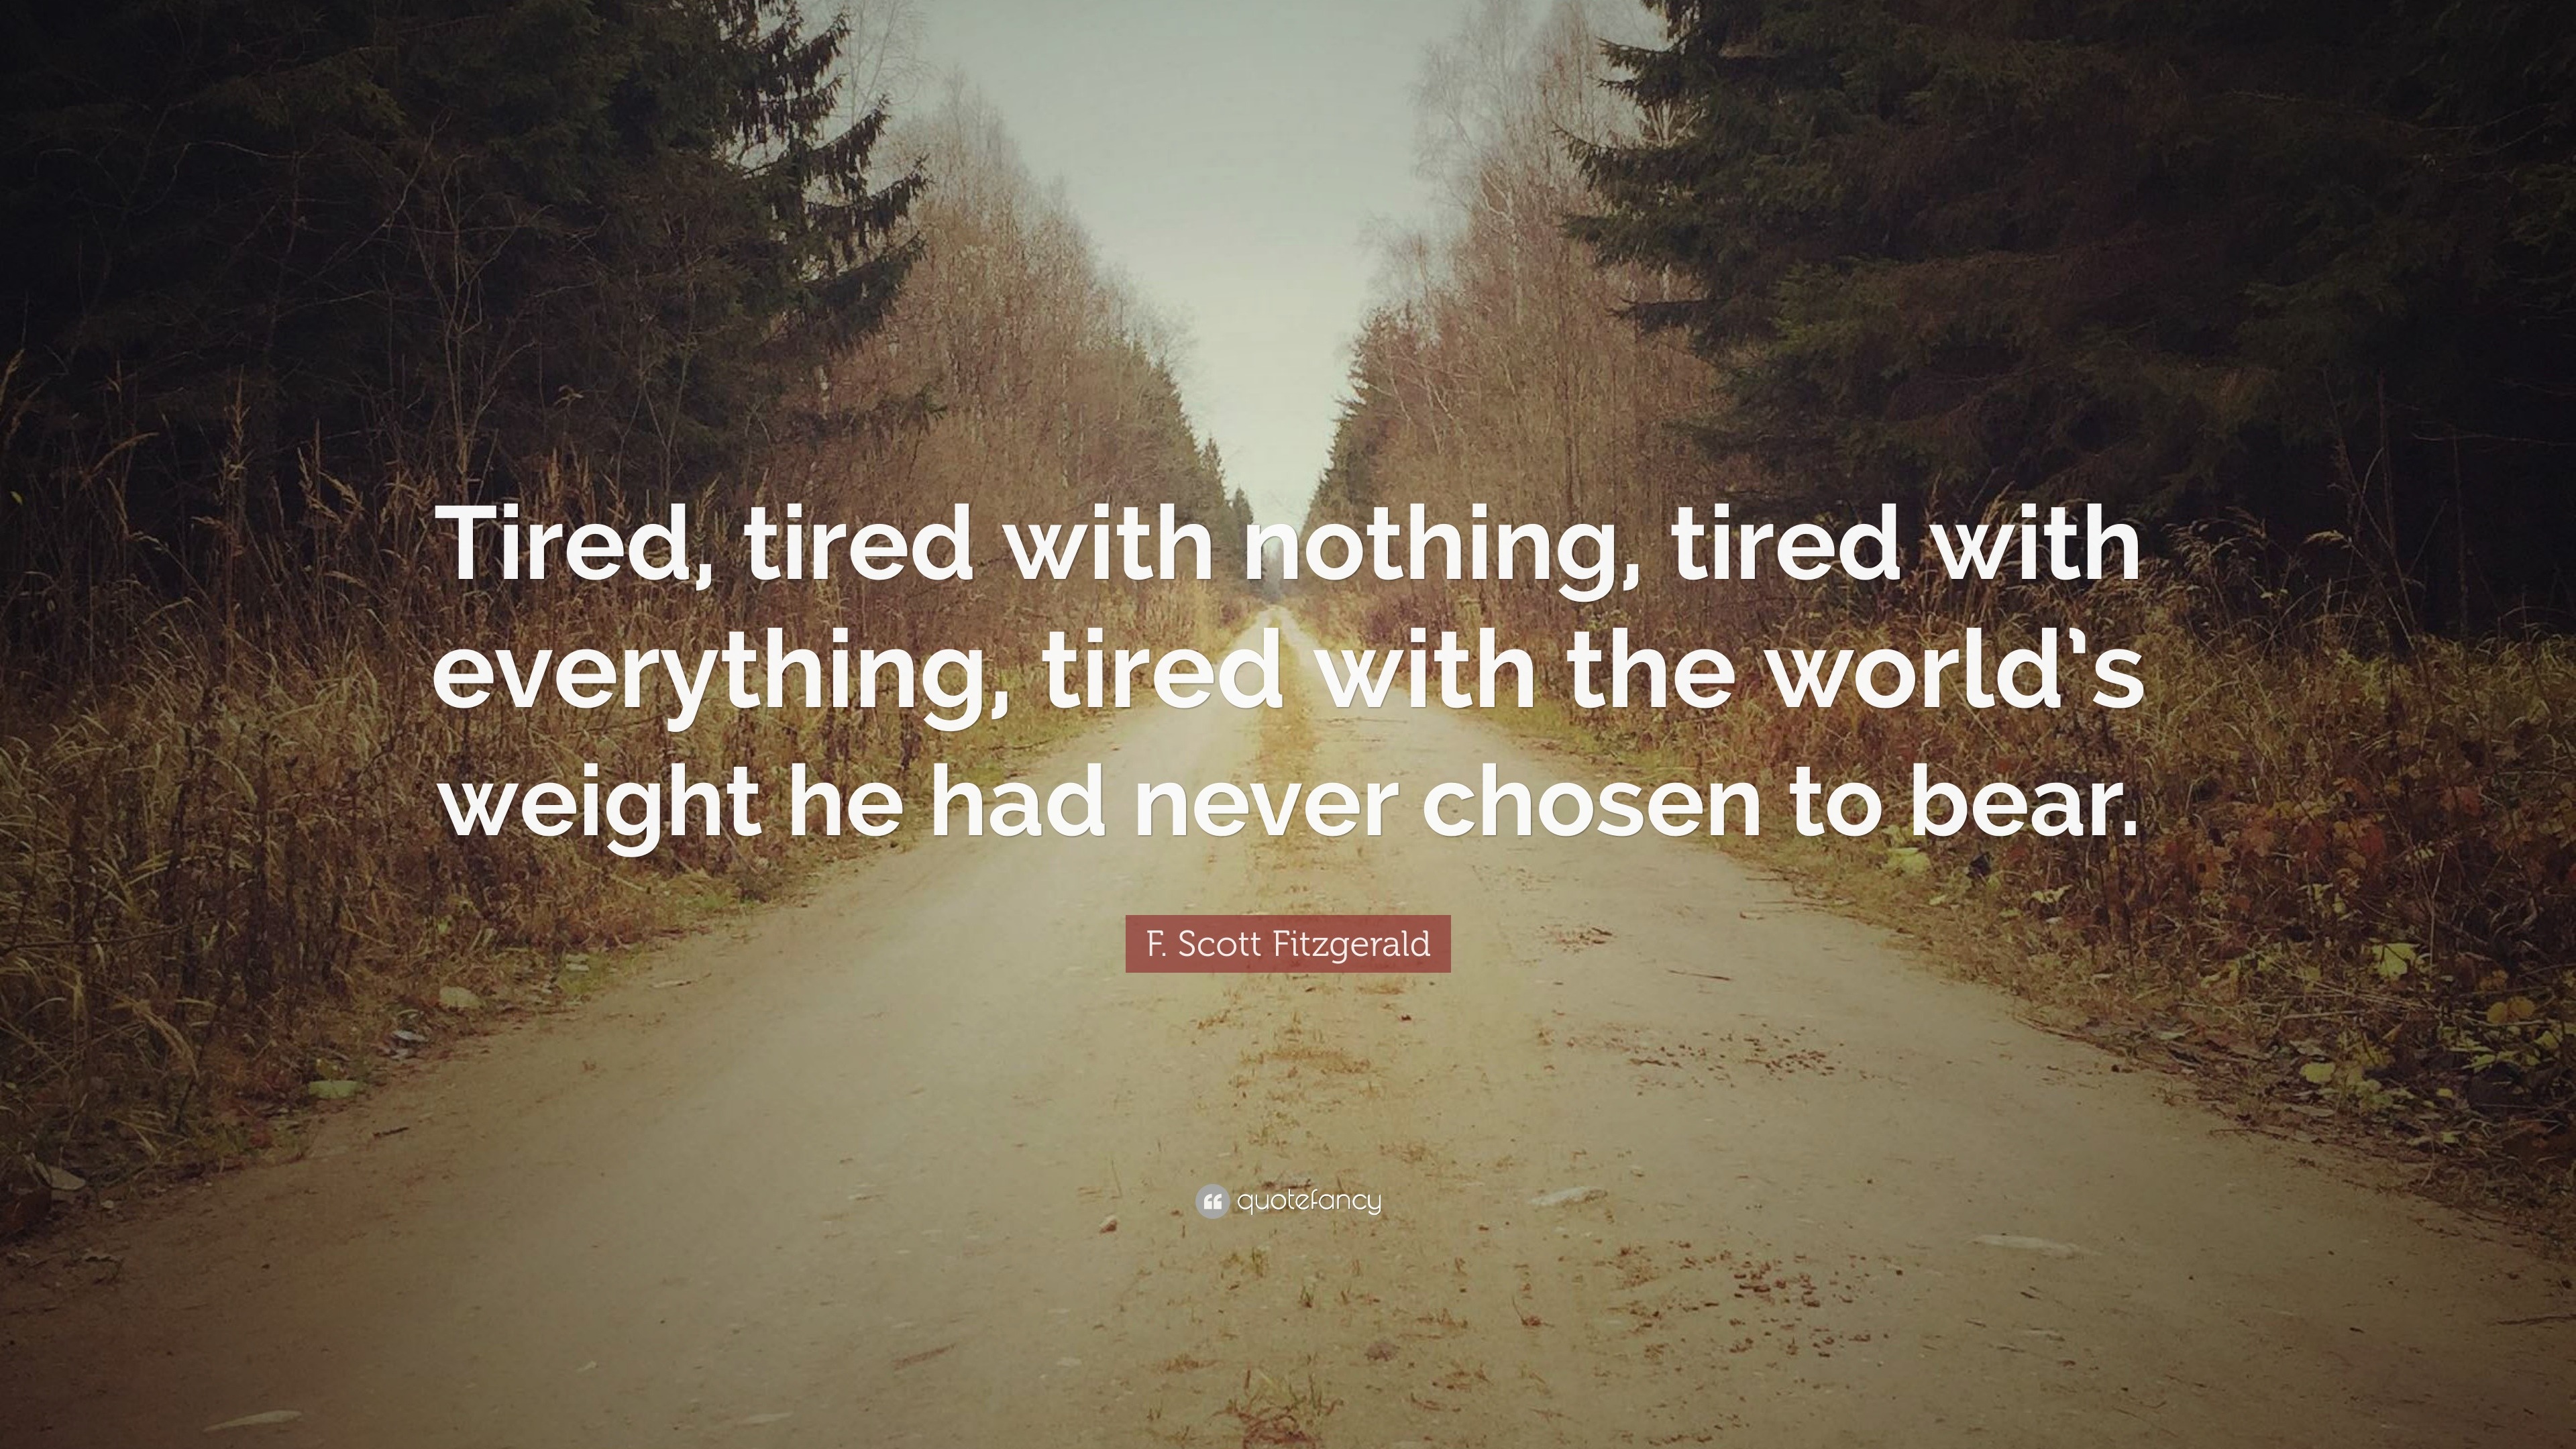 F. Scott Fitzgerald Quote “Tired, tired with nothing